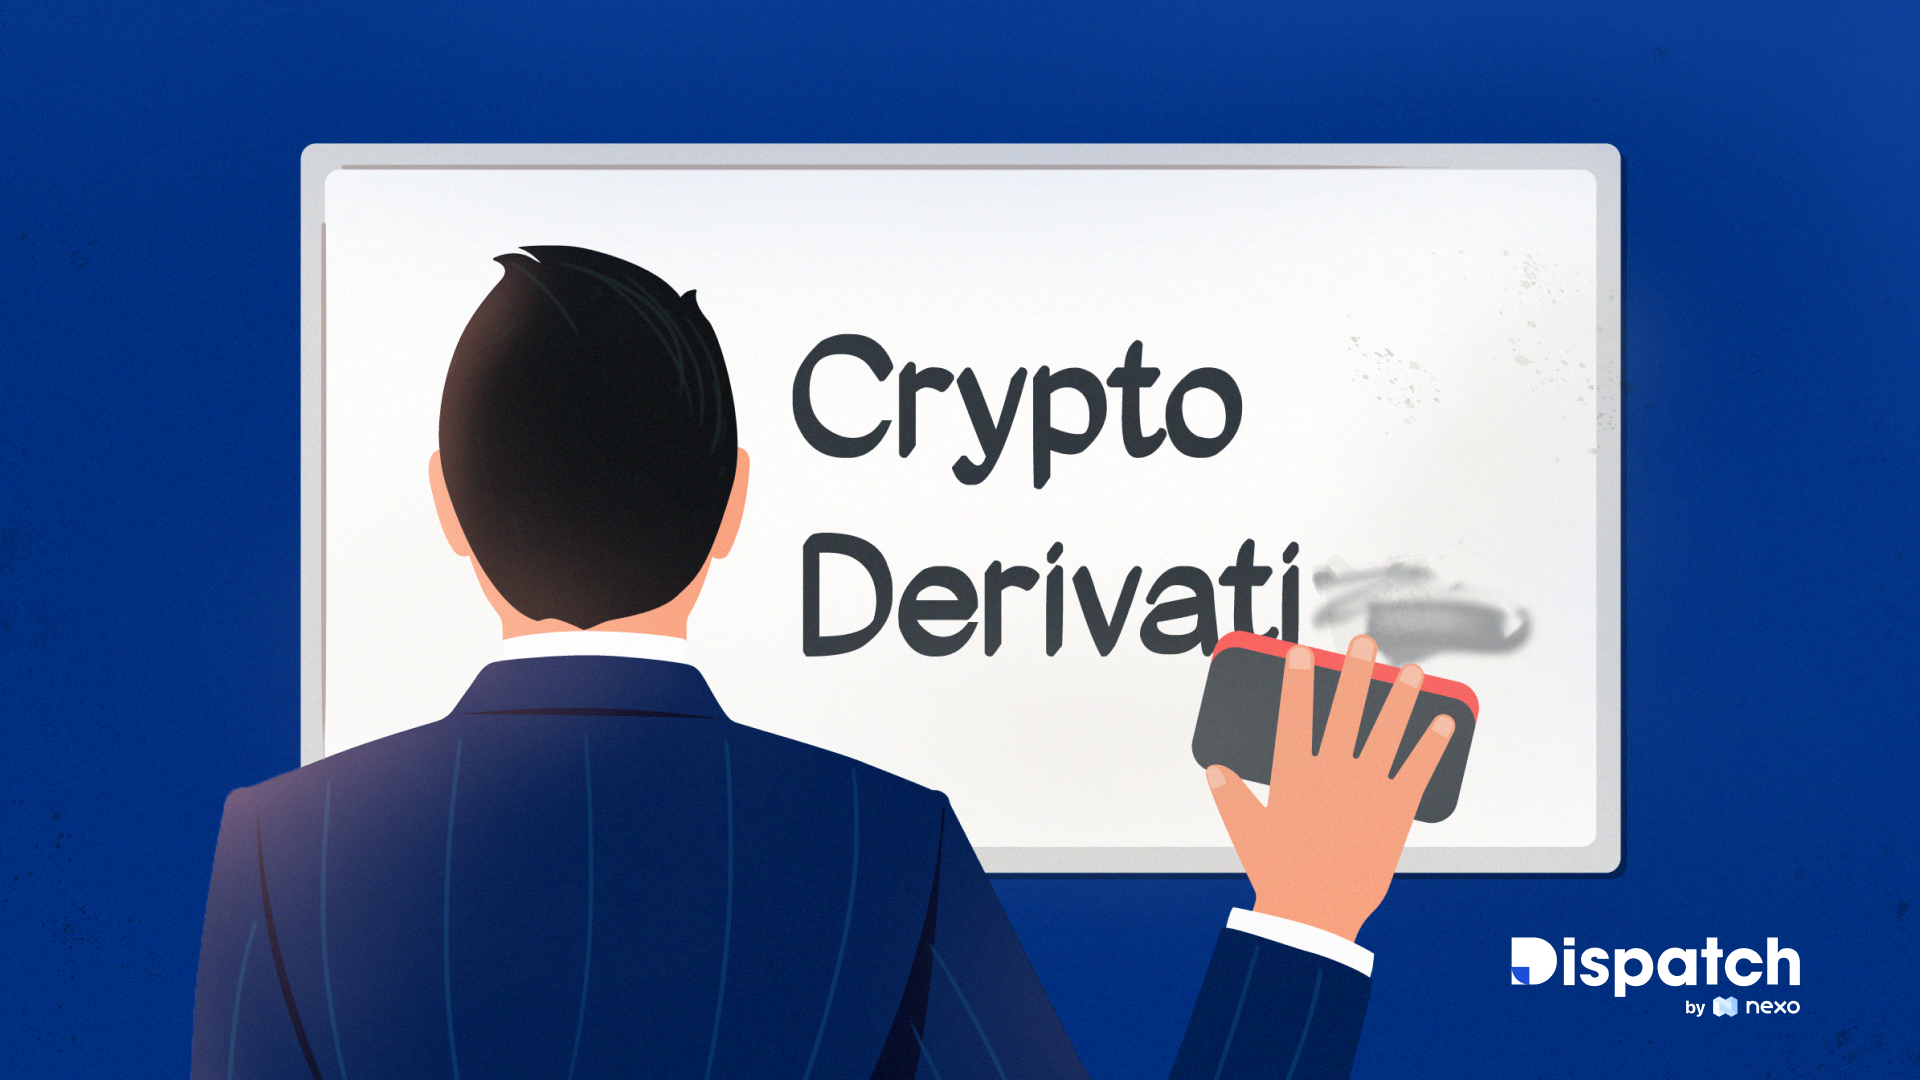 Dispatch #5: Are Regulators Trying to Destroy Crypto Derivatives?